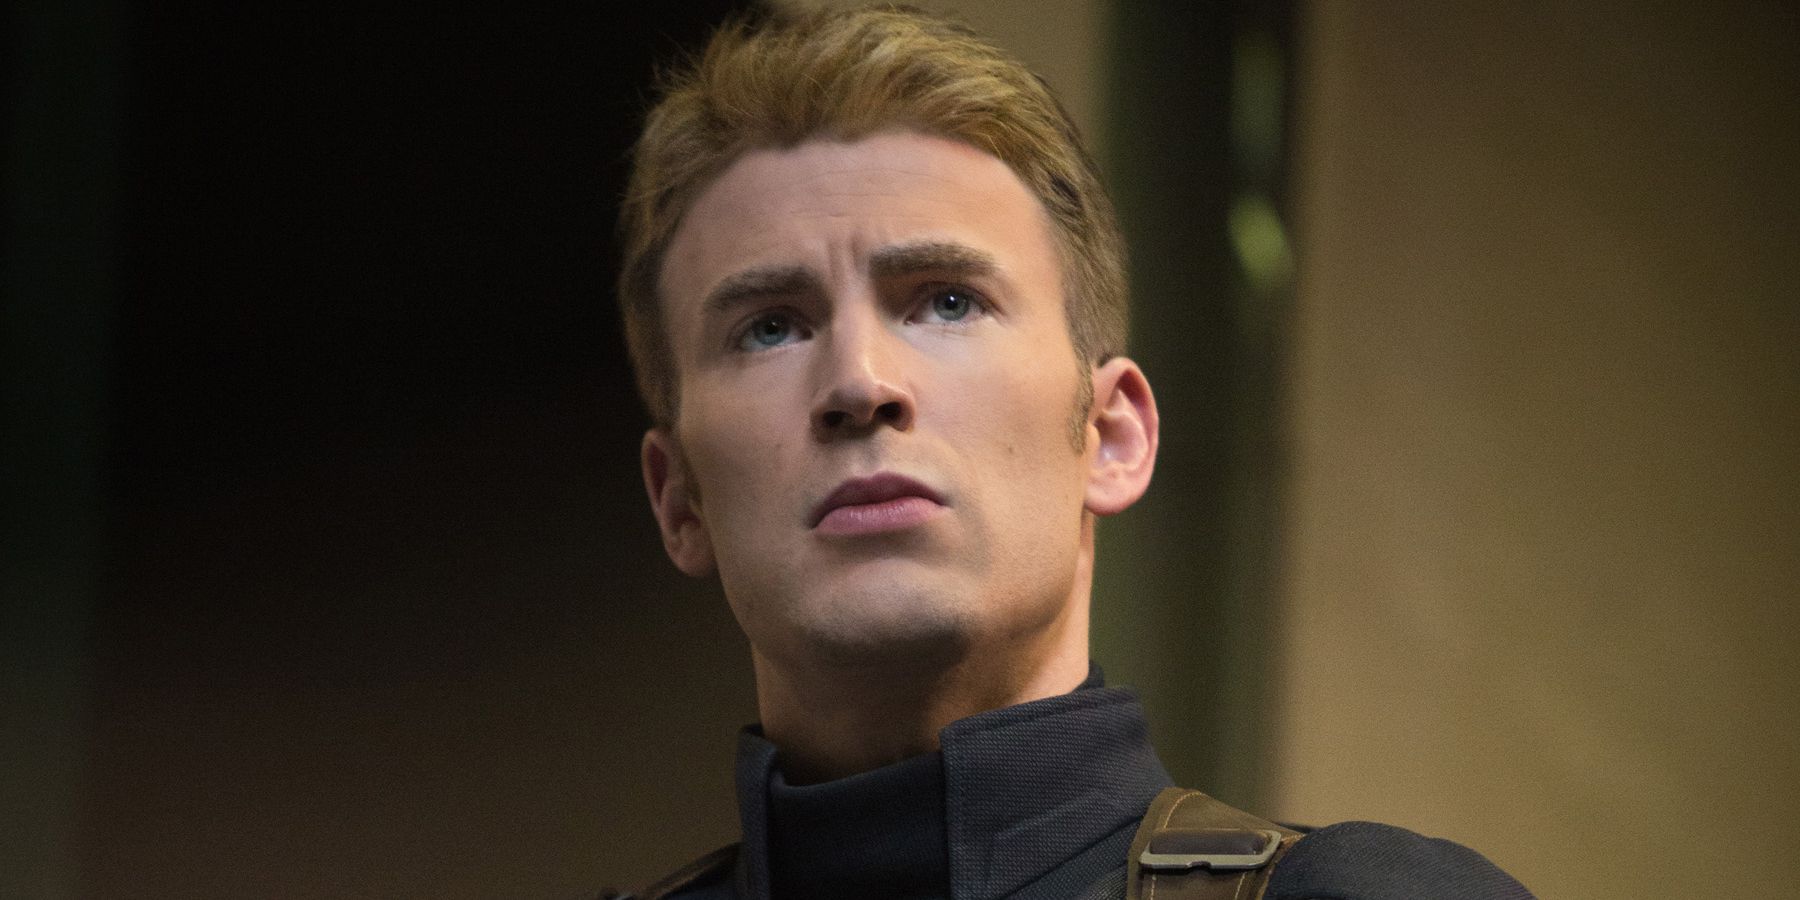 Steve Rogers looks serious in Captain America: The Winter Soldier.